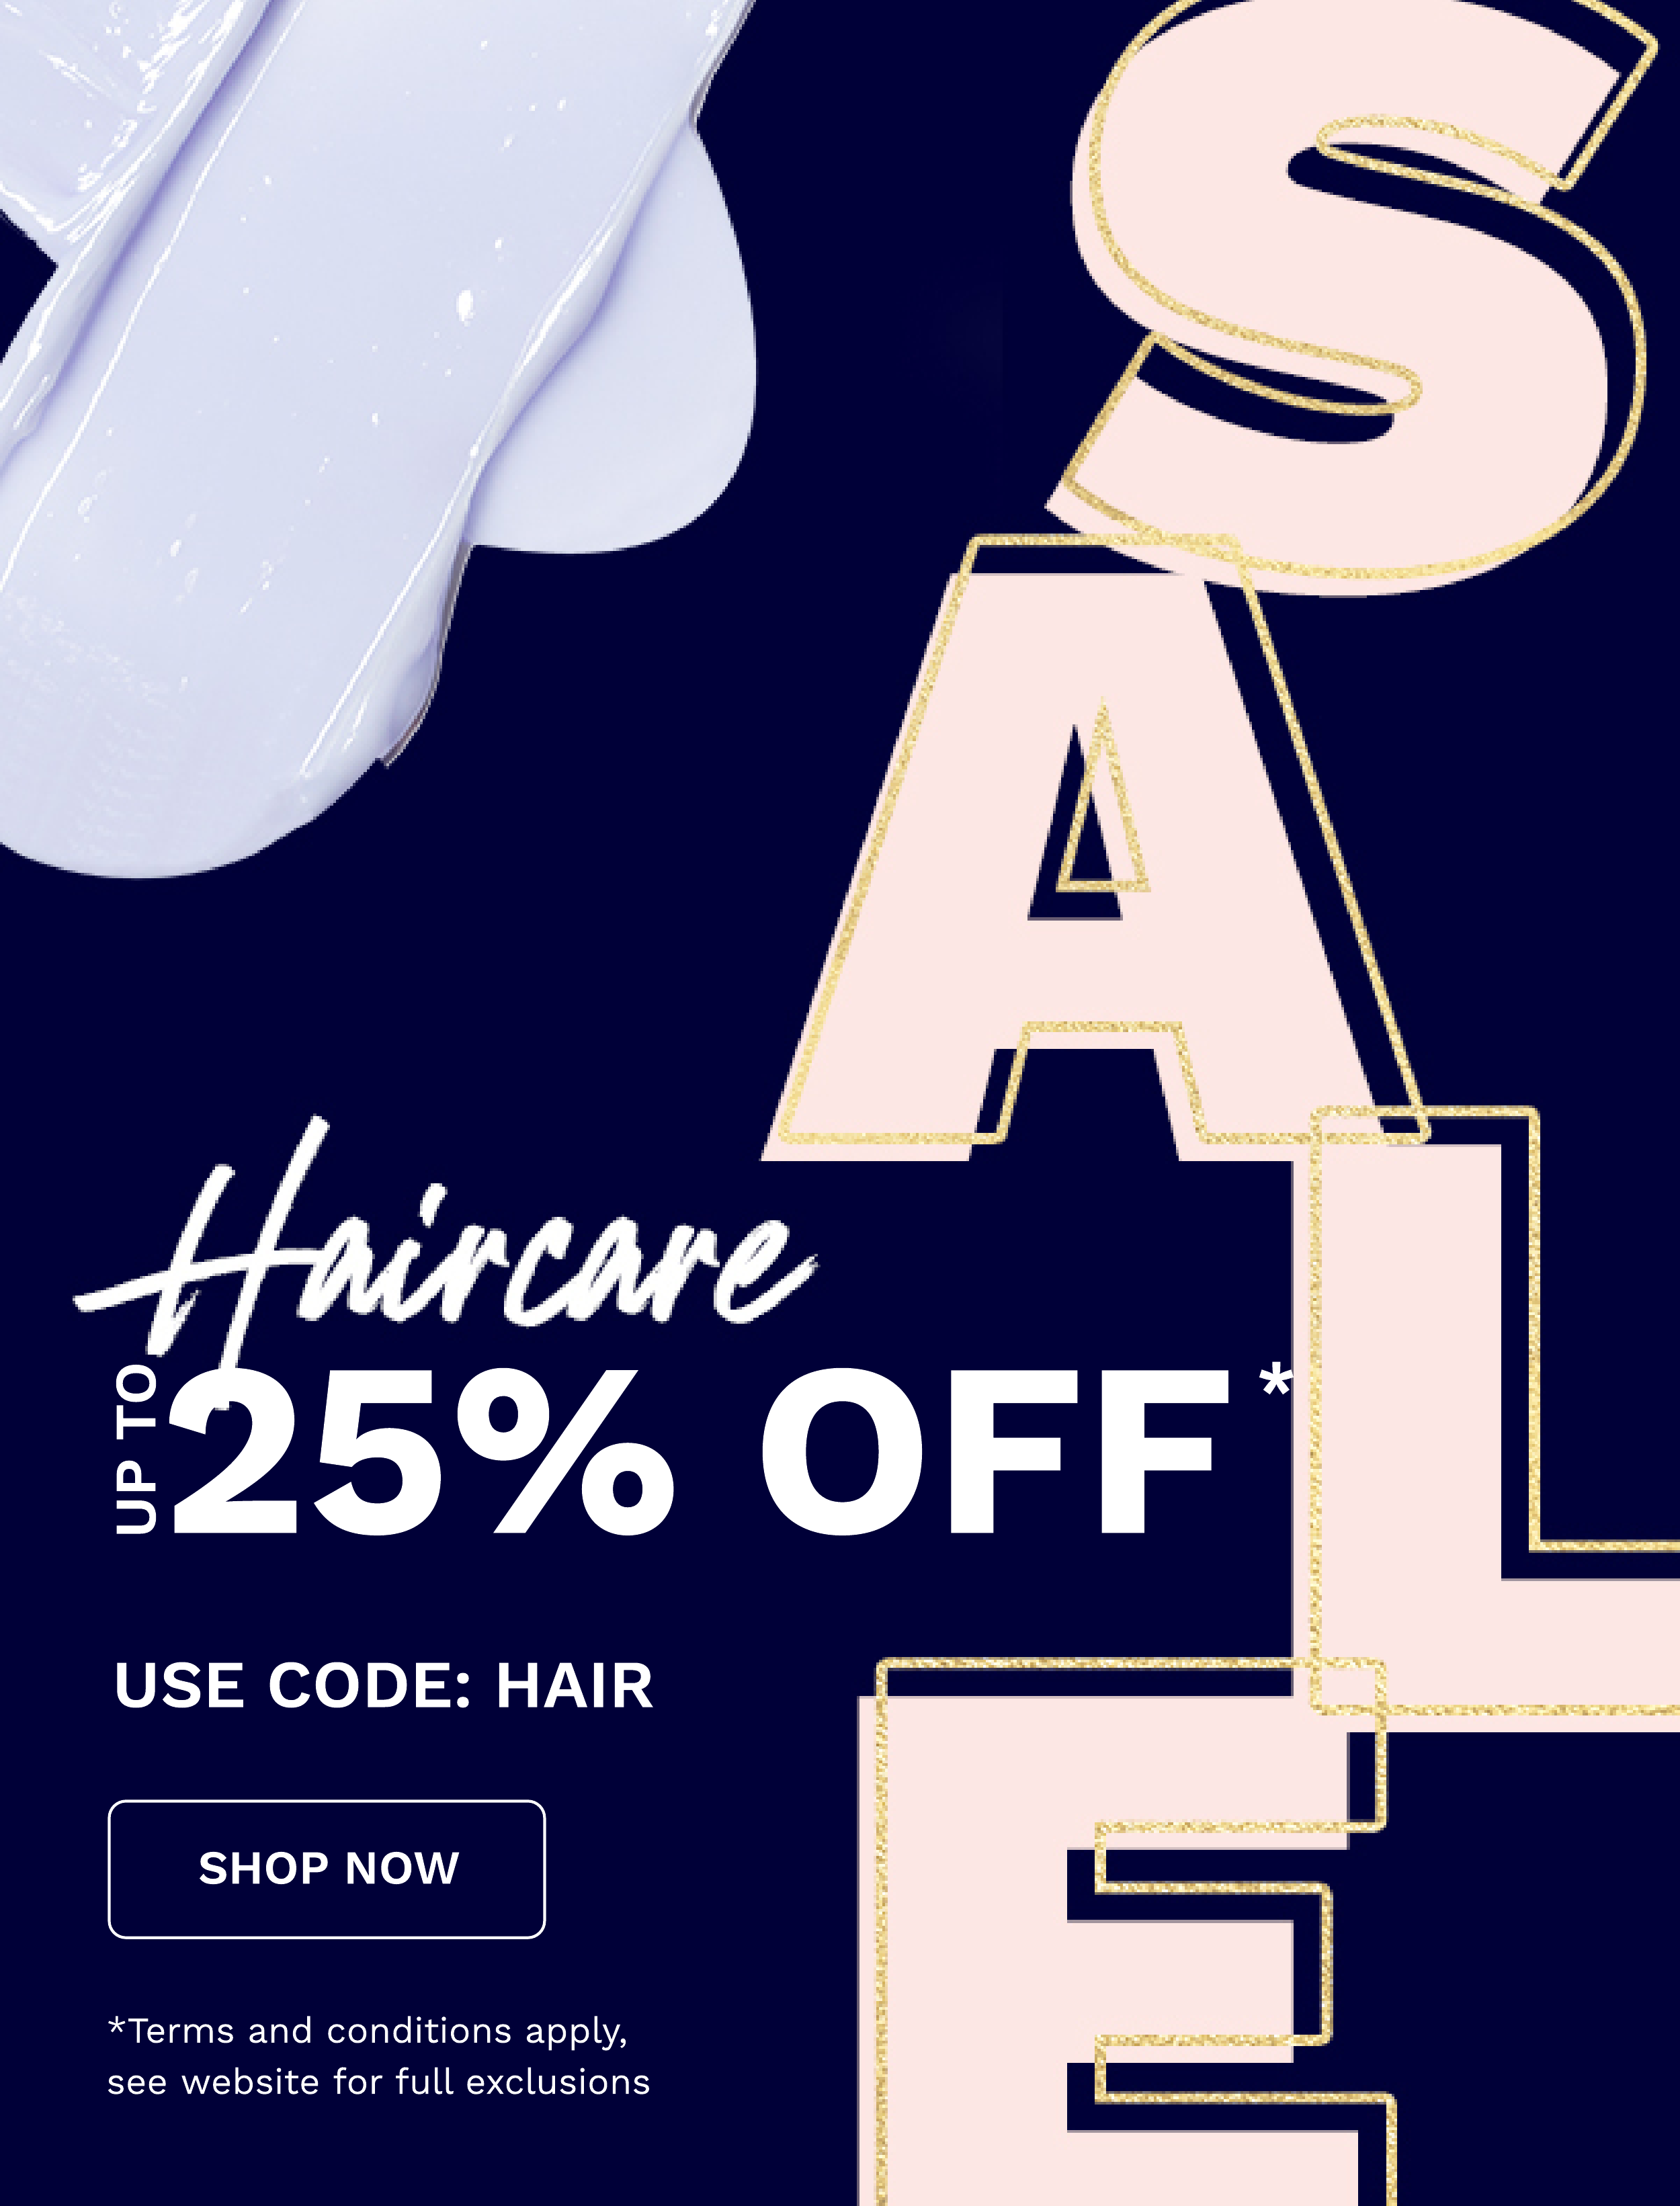 Up to 25 percent off haircare